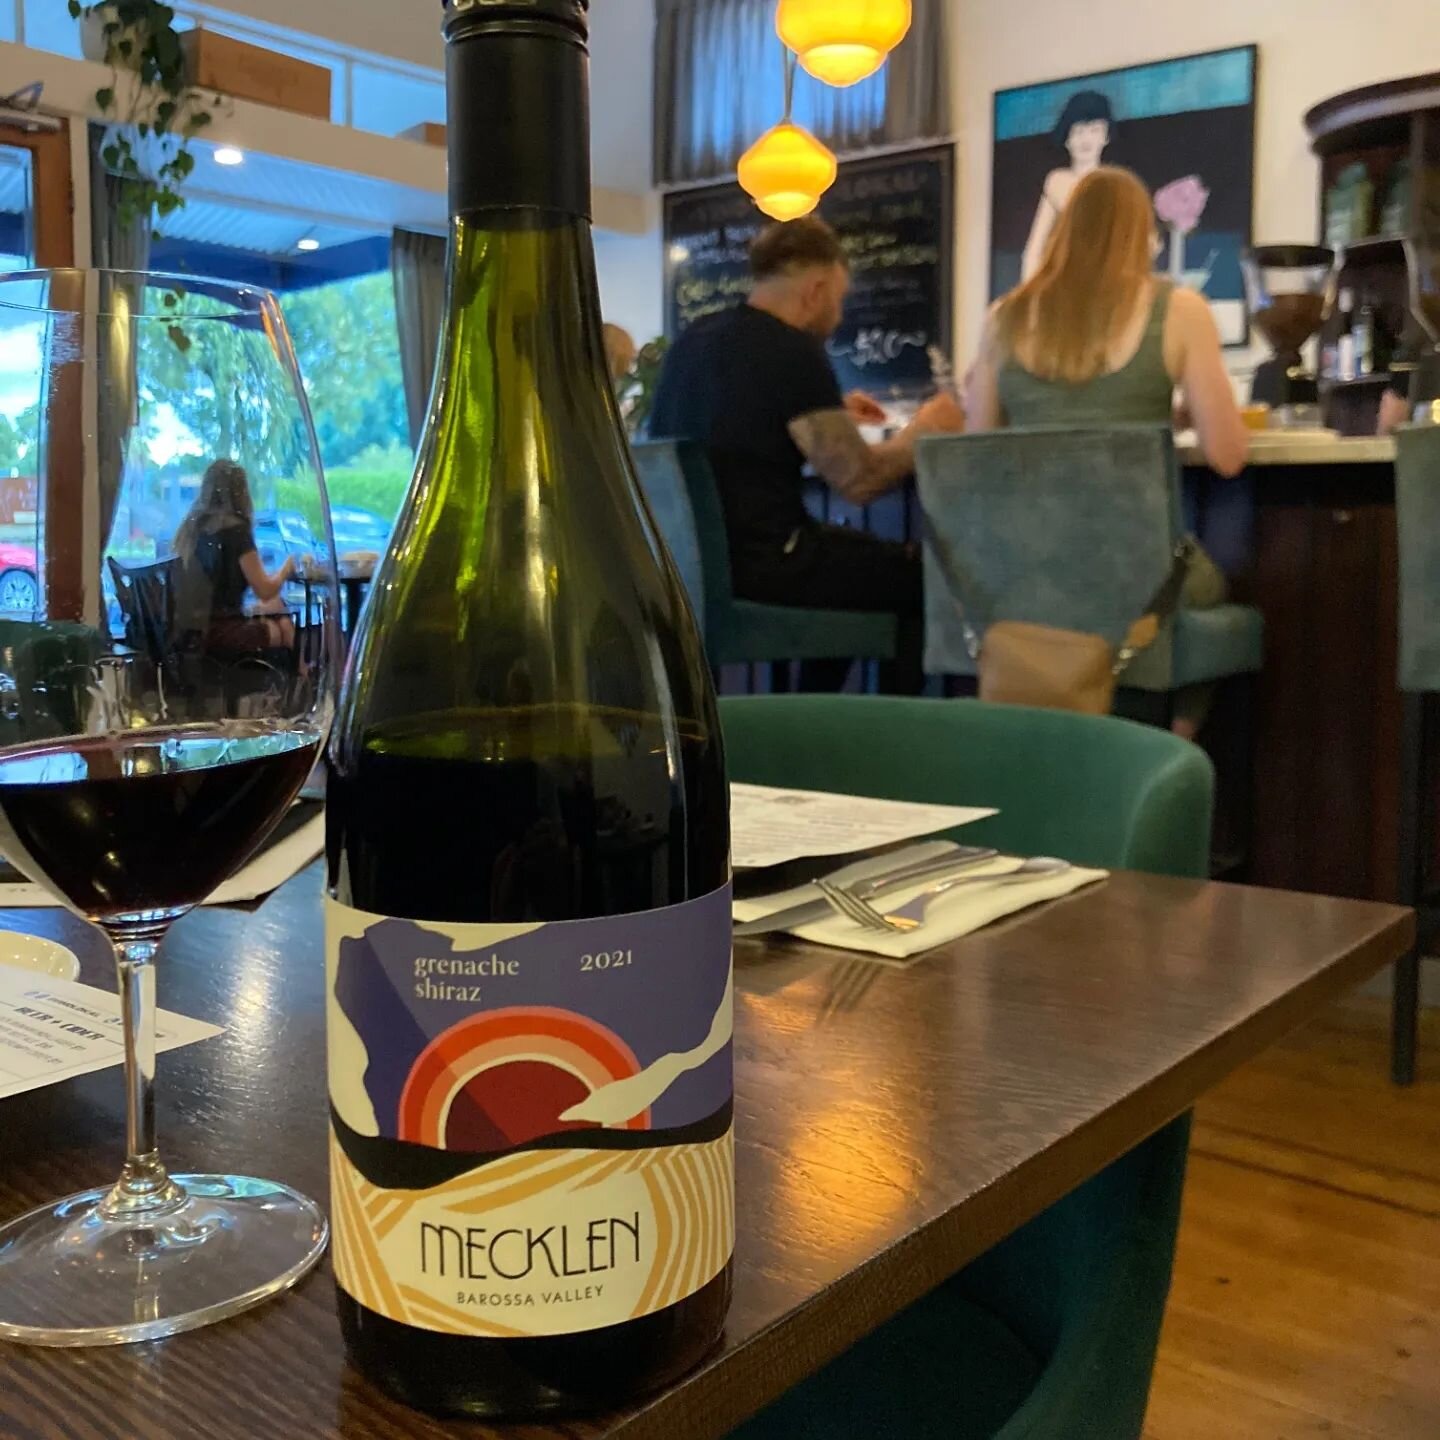 Our 2021 Grenache Shiraz is now available at Vino Lokal in Tanunda, Barossa Valley! With a fantastic range of Barossa wines, VinoLok celebrates the union between great food and the art of winemaking

#barossawines #barossavalley #barossawine #vinolok